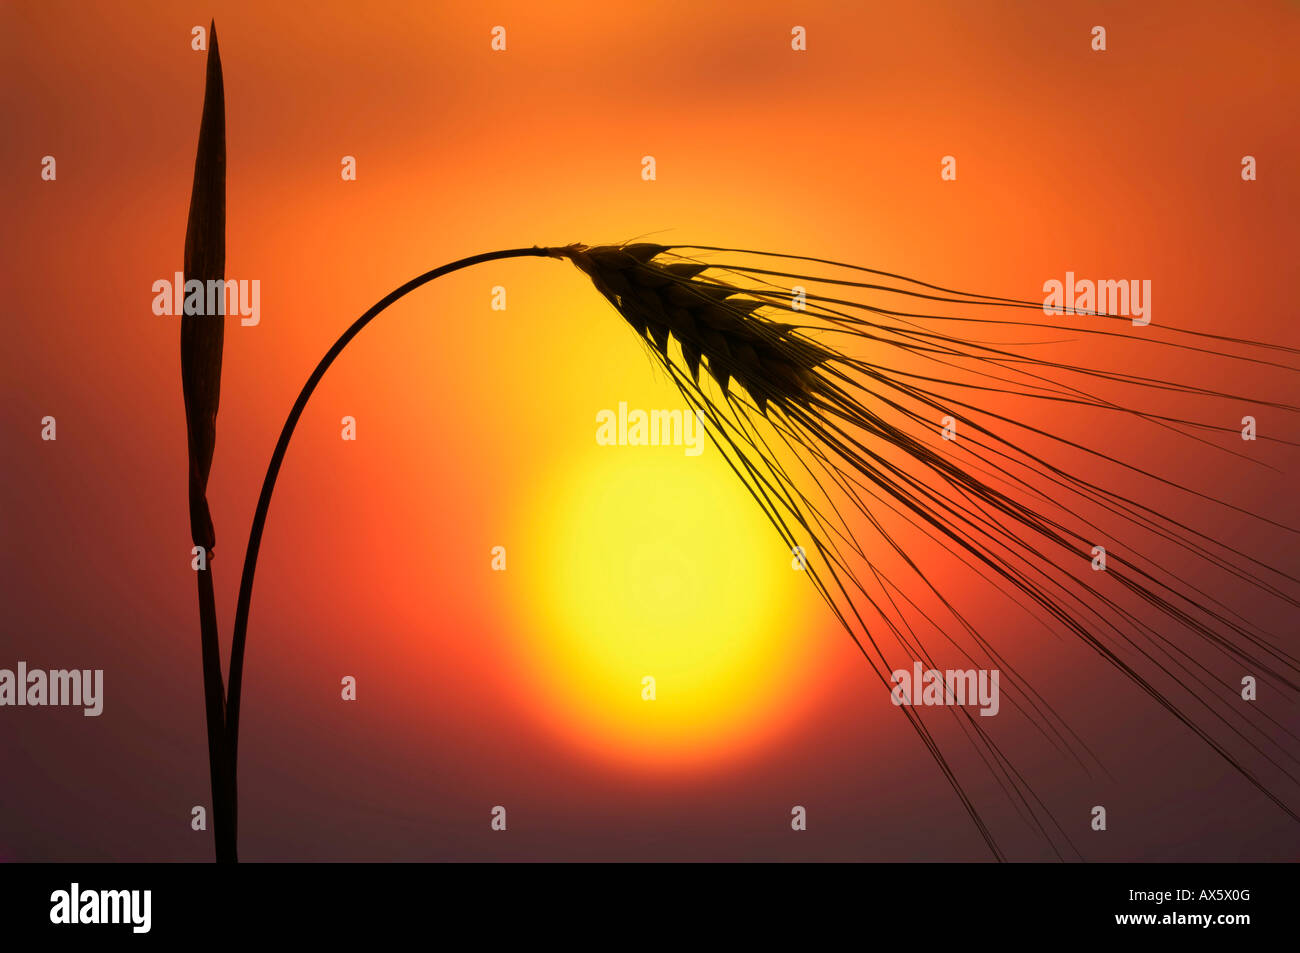 Barley (Hordeum vulgare) in front of glowing evening sun Stock Photo